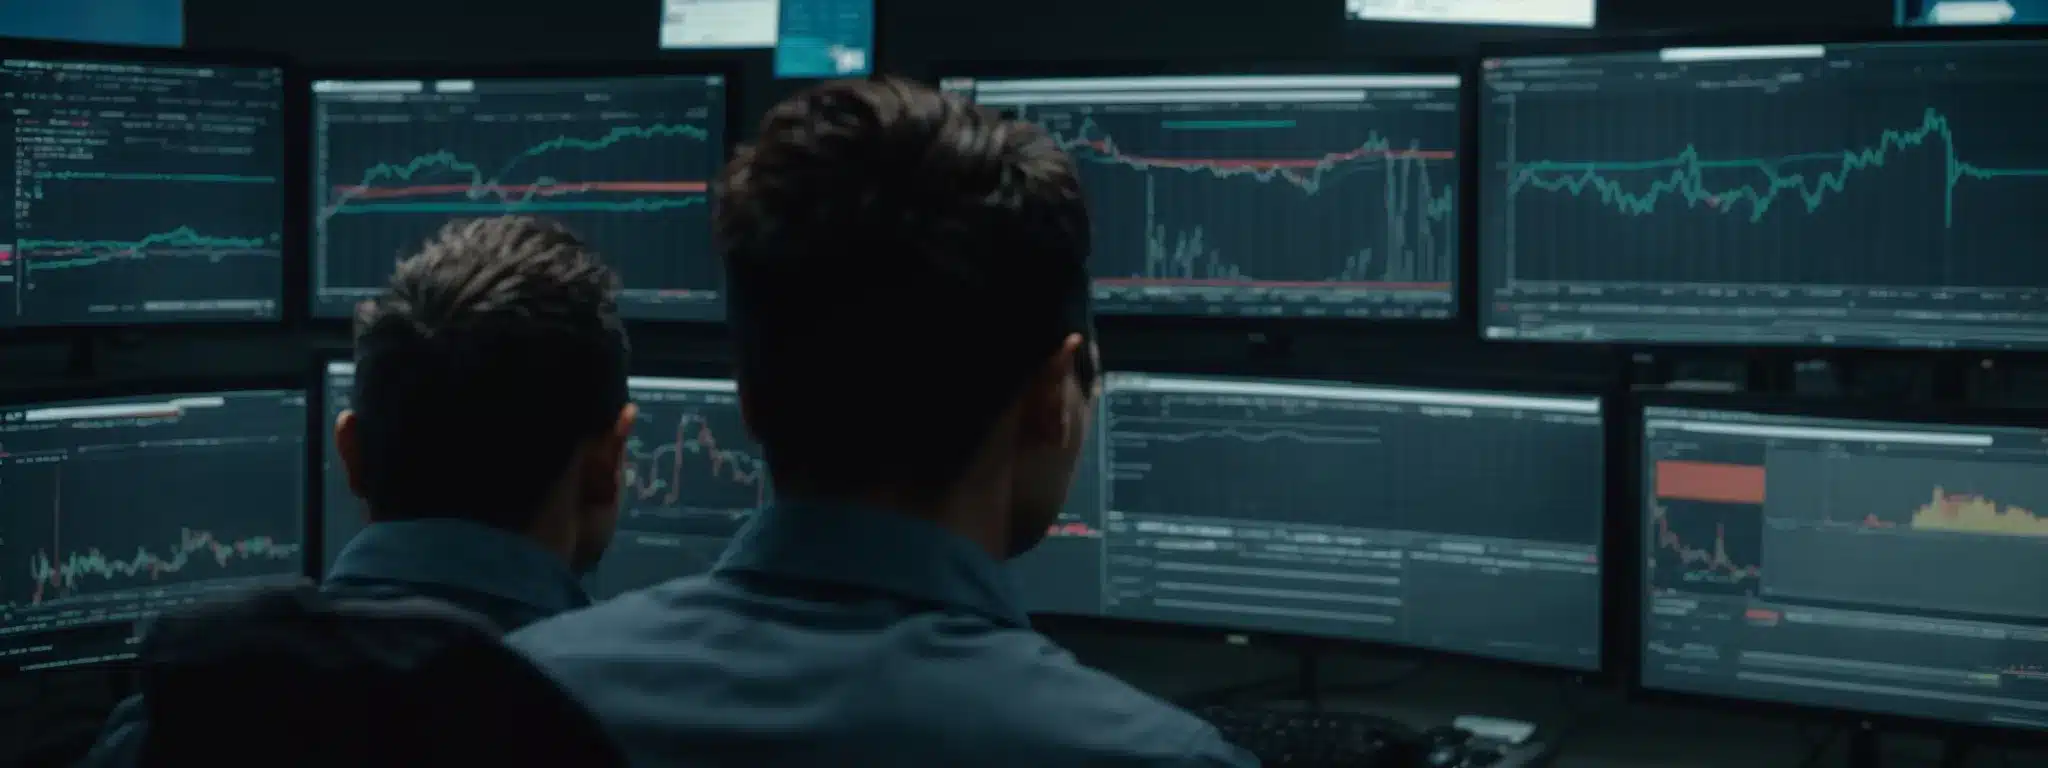 A Webmaster Intently Monitors Complex Analytics On Computer Screens, Revealing The Performance Of A Website.